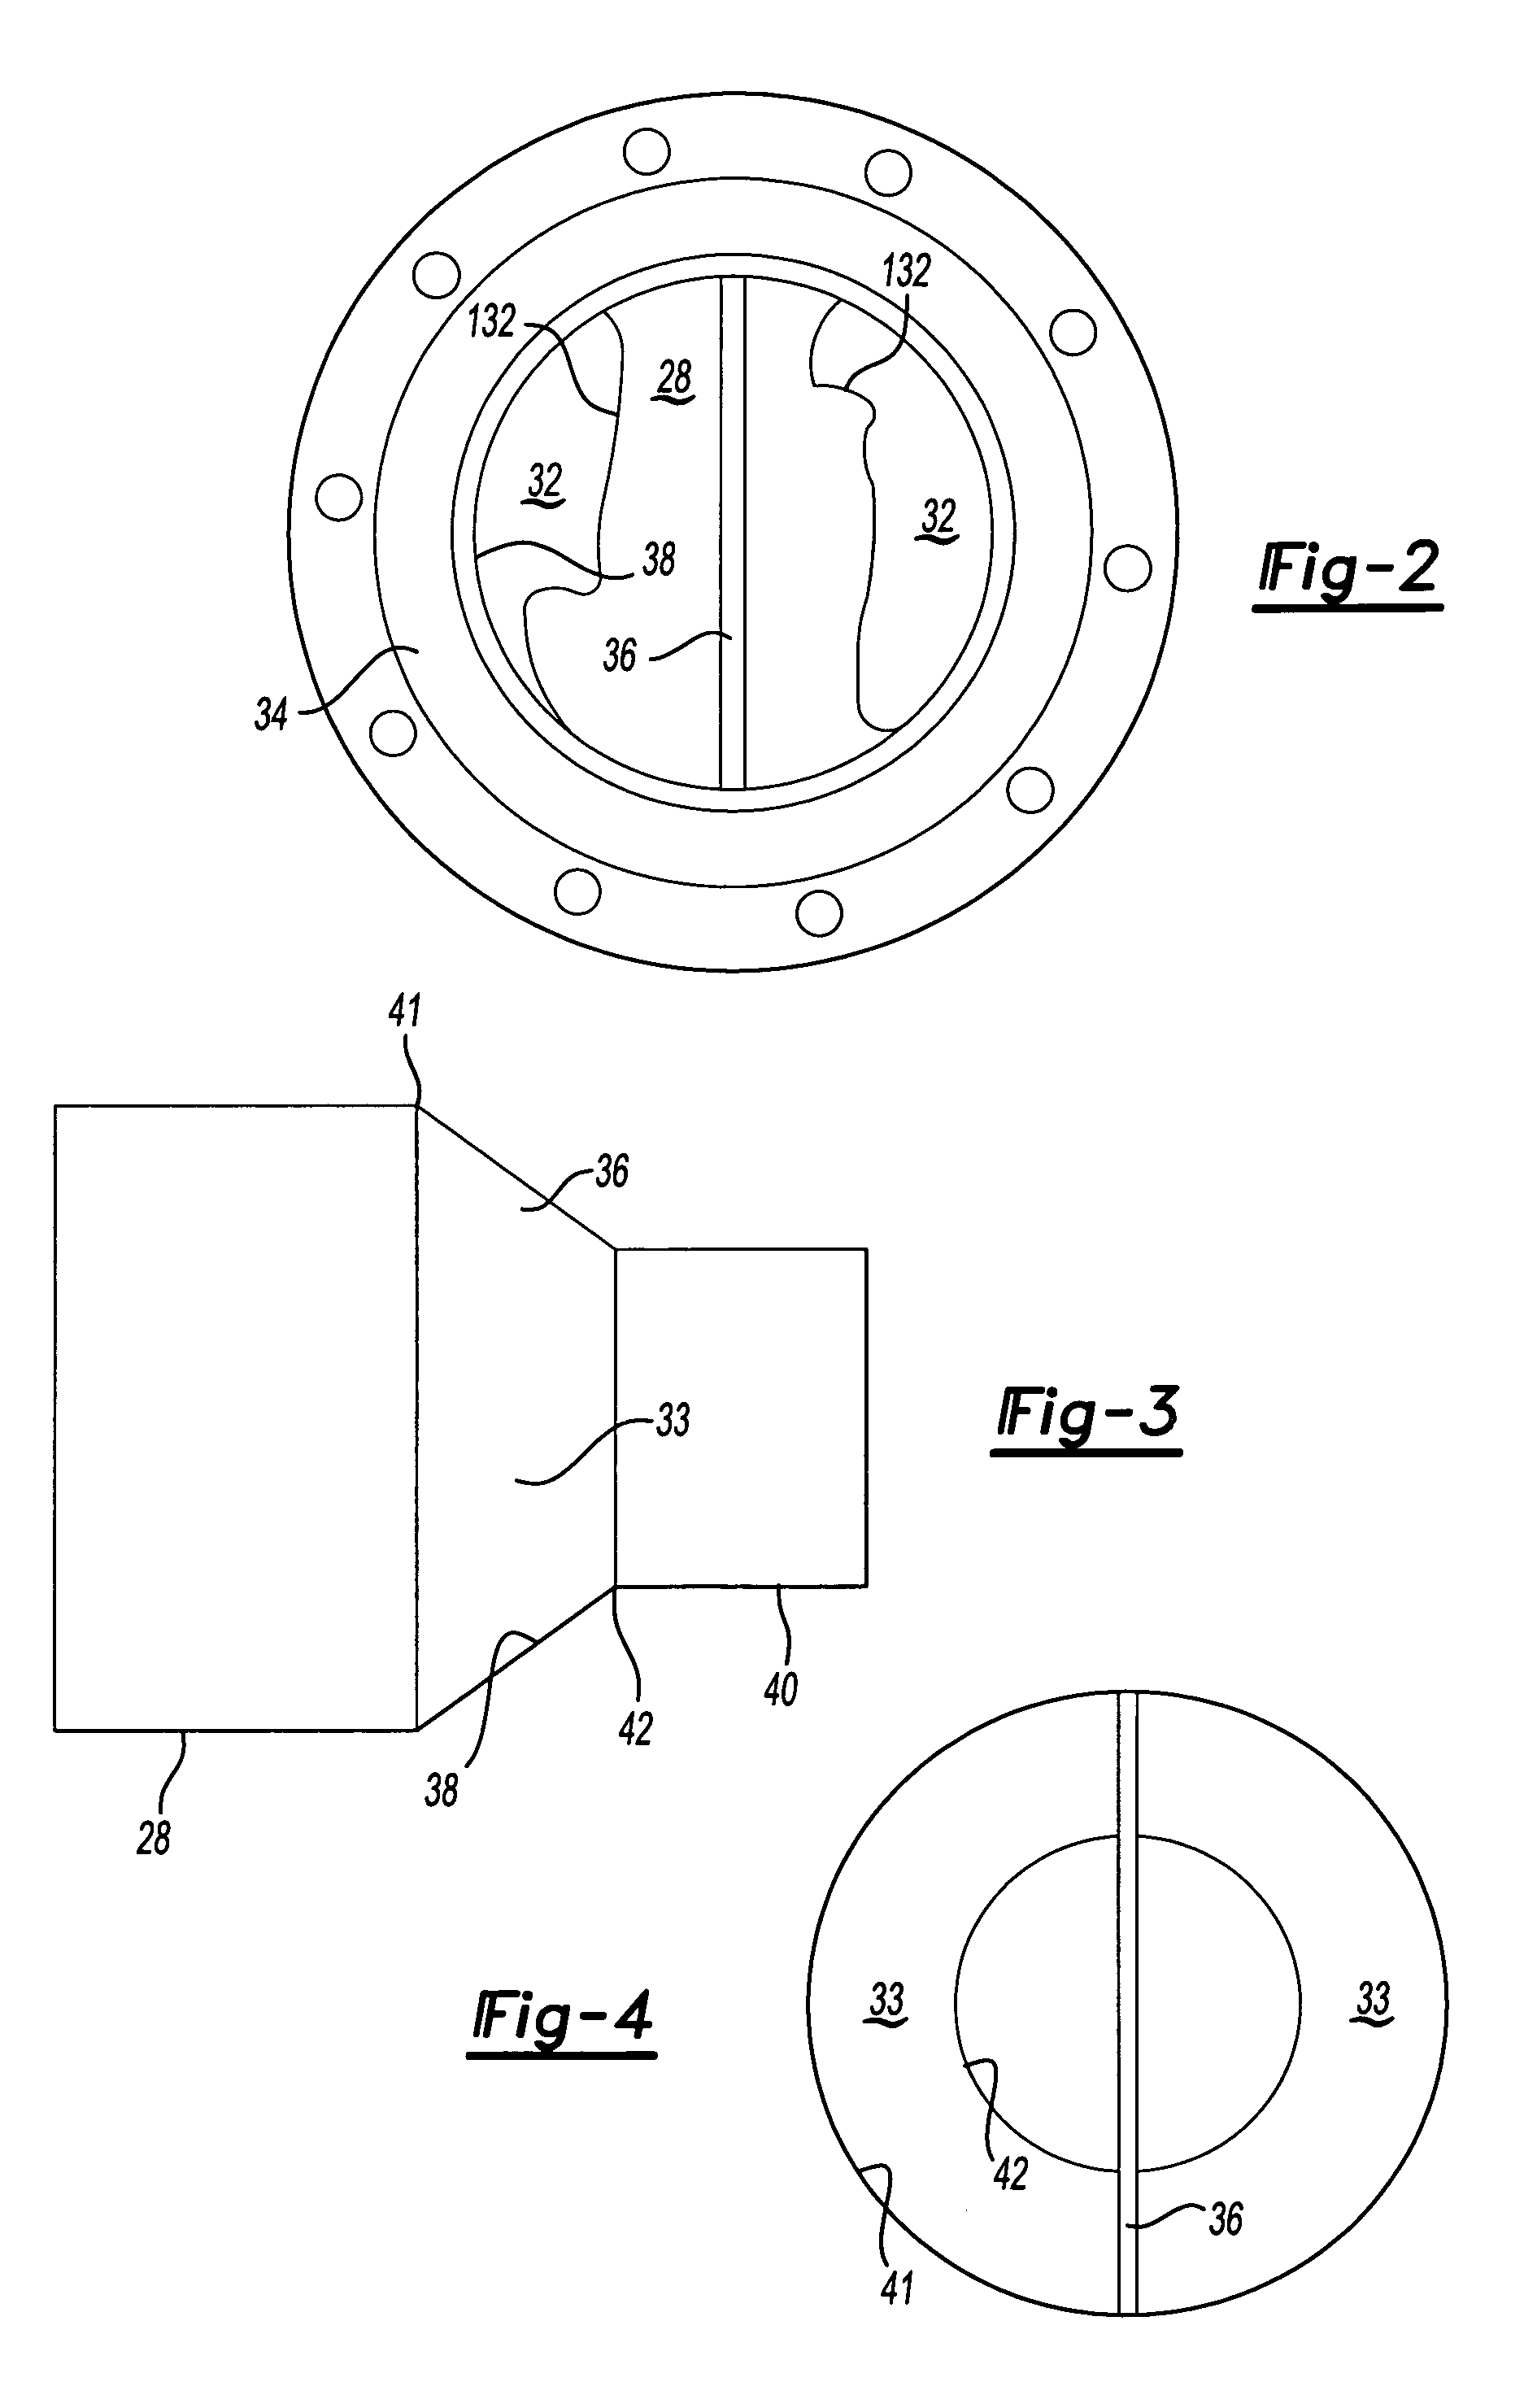 Compressor discharge chamber with baffle plate